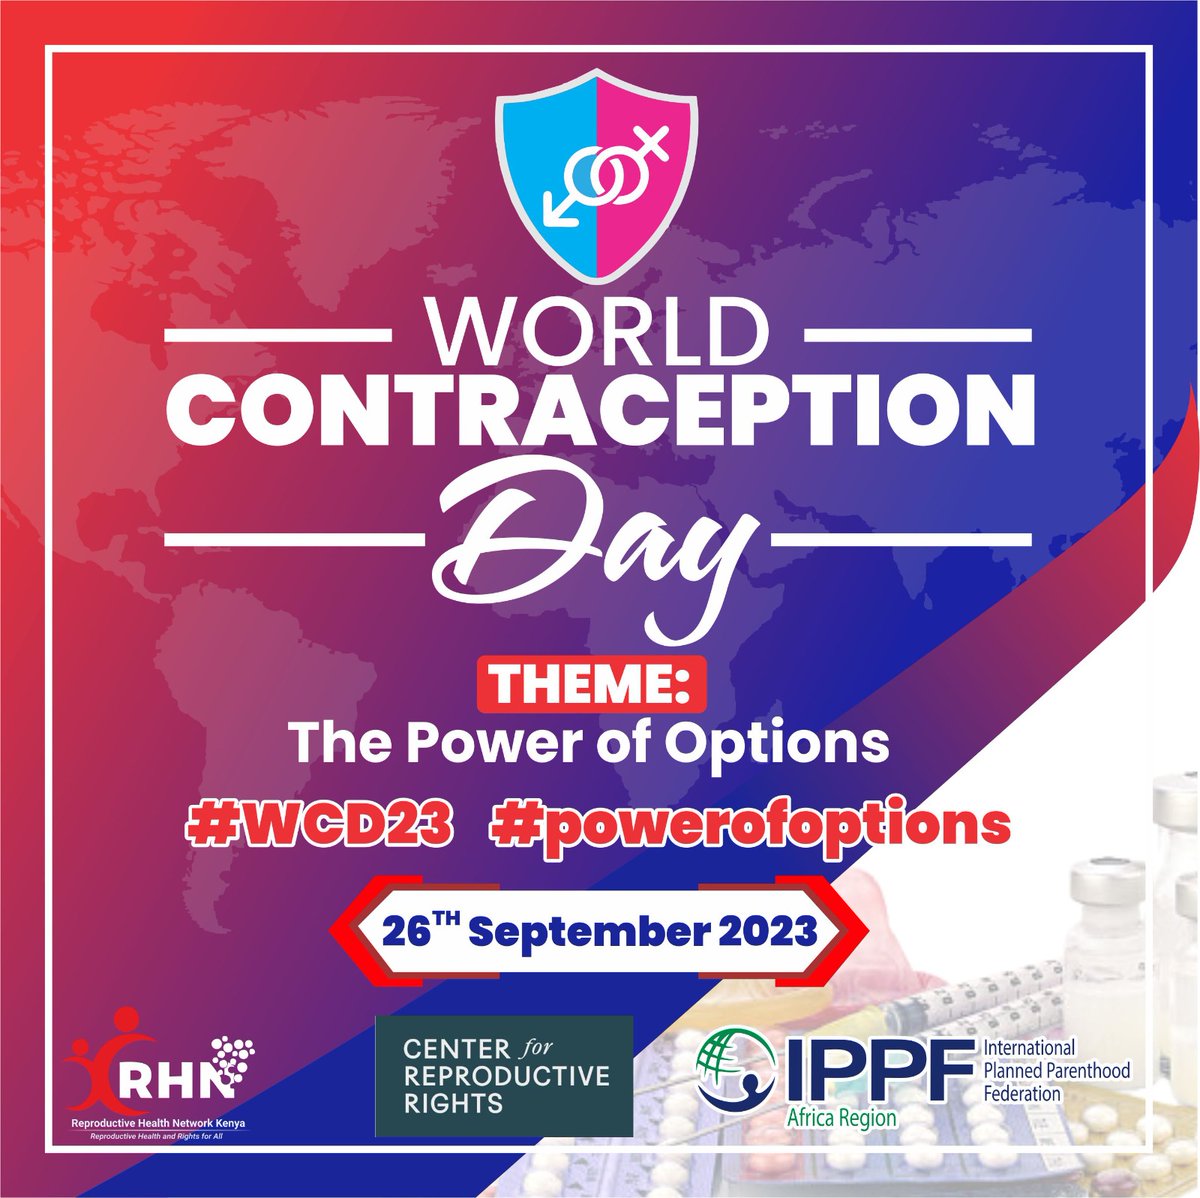 As we commemorate #WCD2023, the theme this year is all about the #PowerOfOptions. And yes, we all need to have options for the kind of contraceptive to be used. 
Let's embrace the use of contraceptives that are most preferable to our own self and healthy to us.